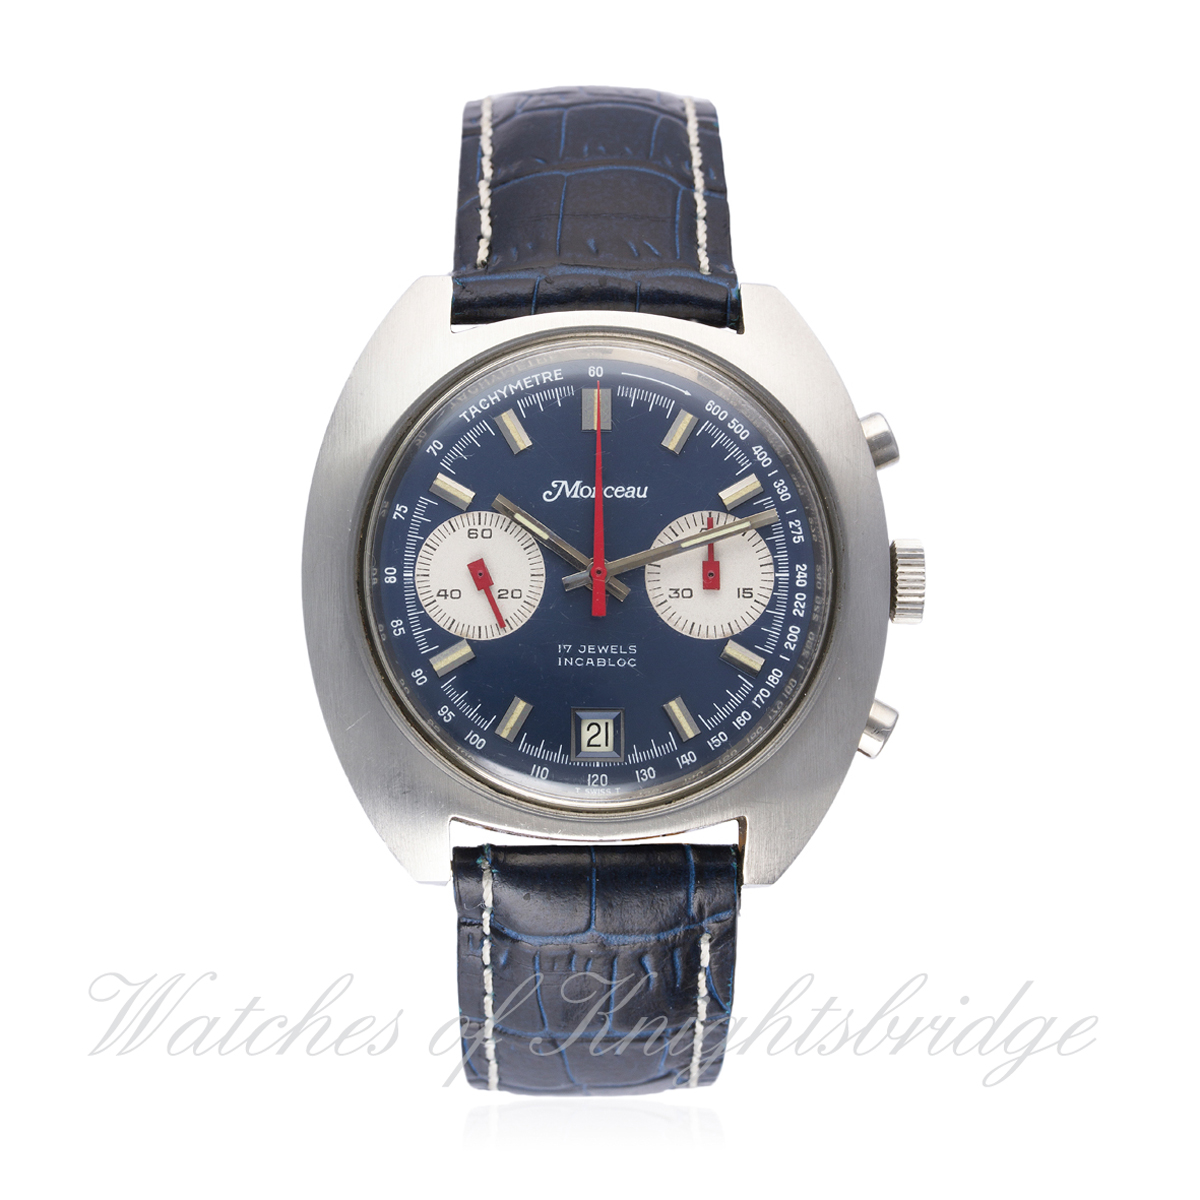 A GENTLEMAN’S STAINLESS STEEL MONCEAU CHRONOGRAPH WRIST WATCH
CIRCA 1970s
D: Blue dial with